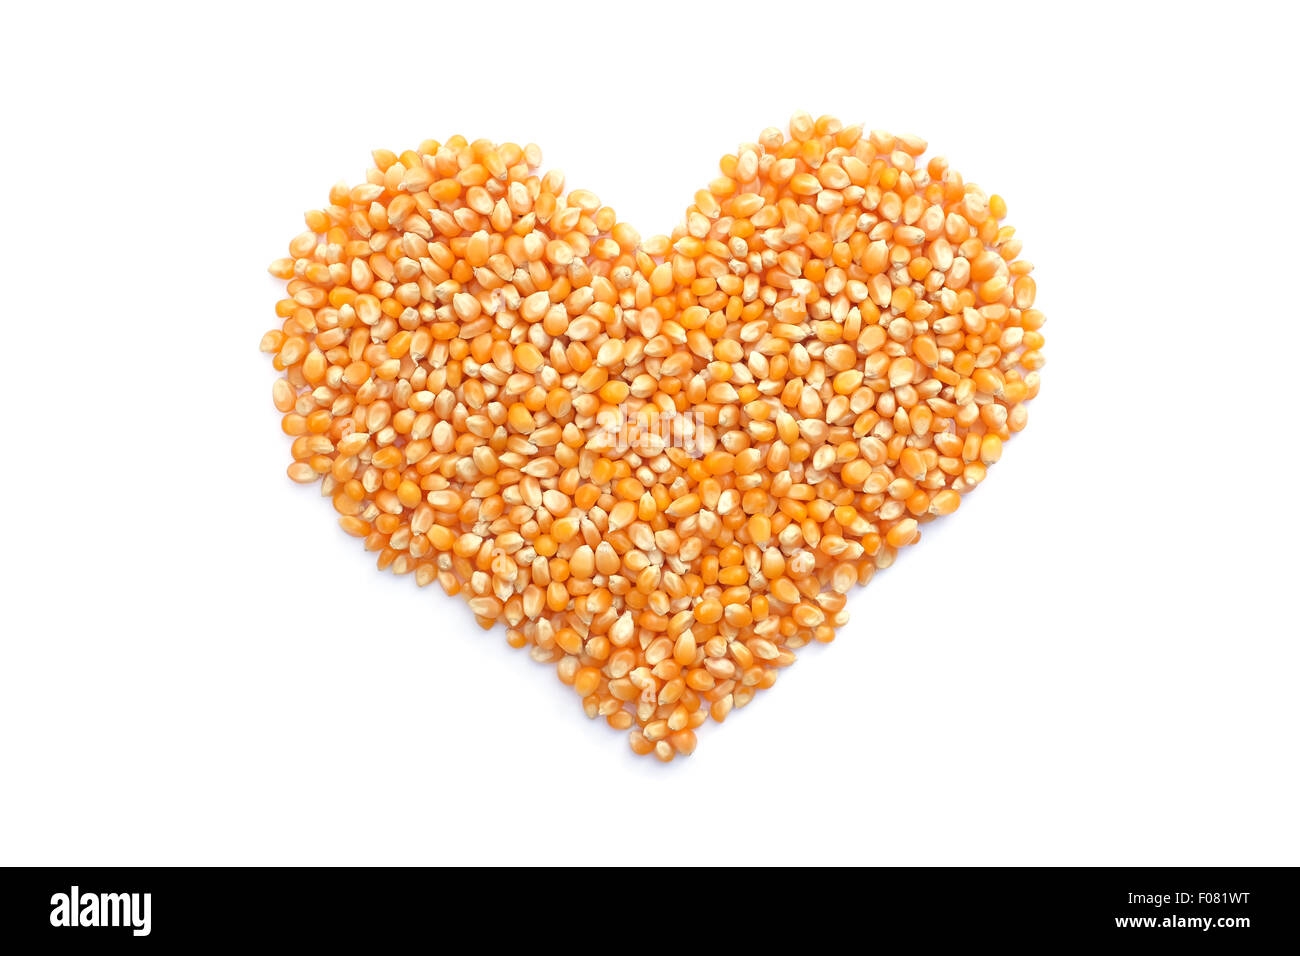 Popcorn maize in a heart shape, isolated on a white background Stock Photo